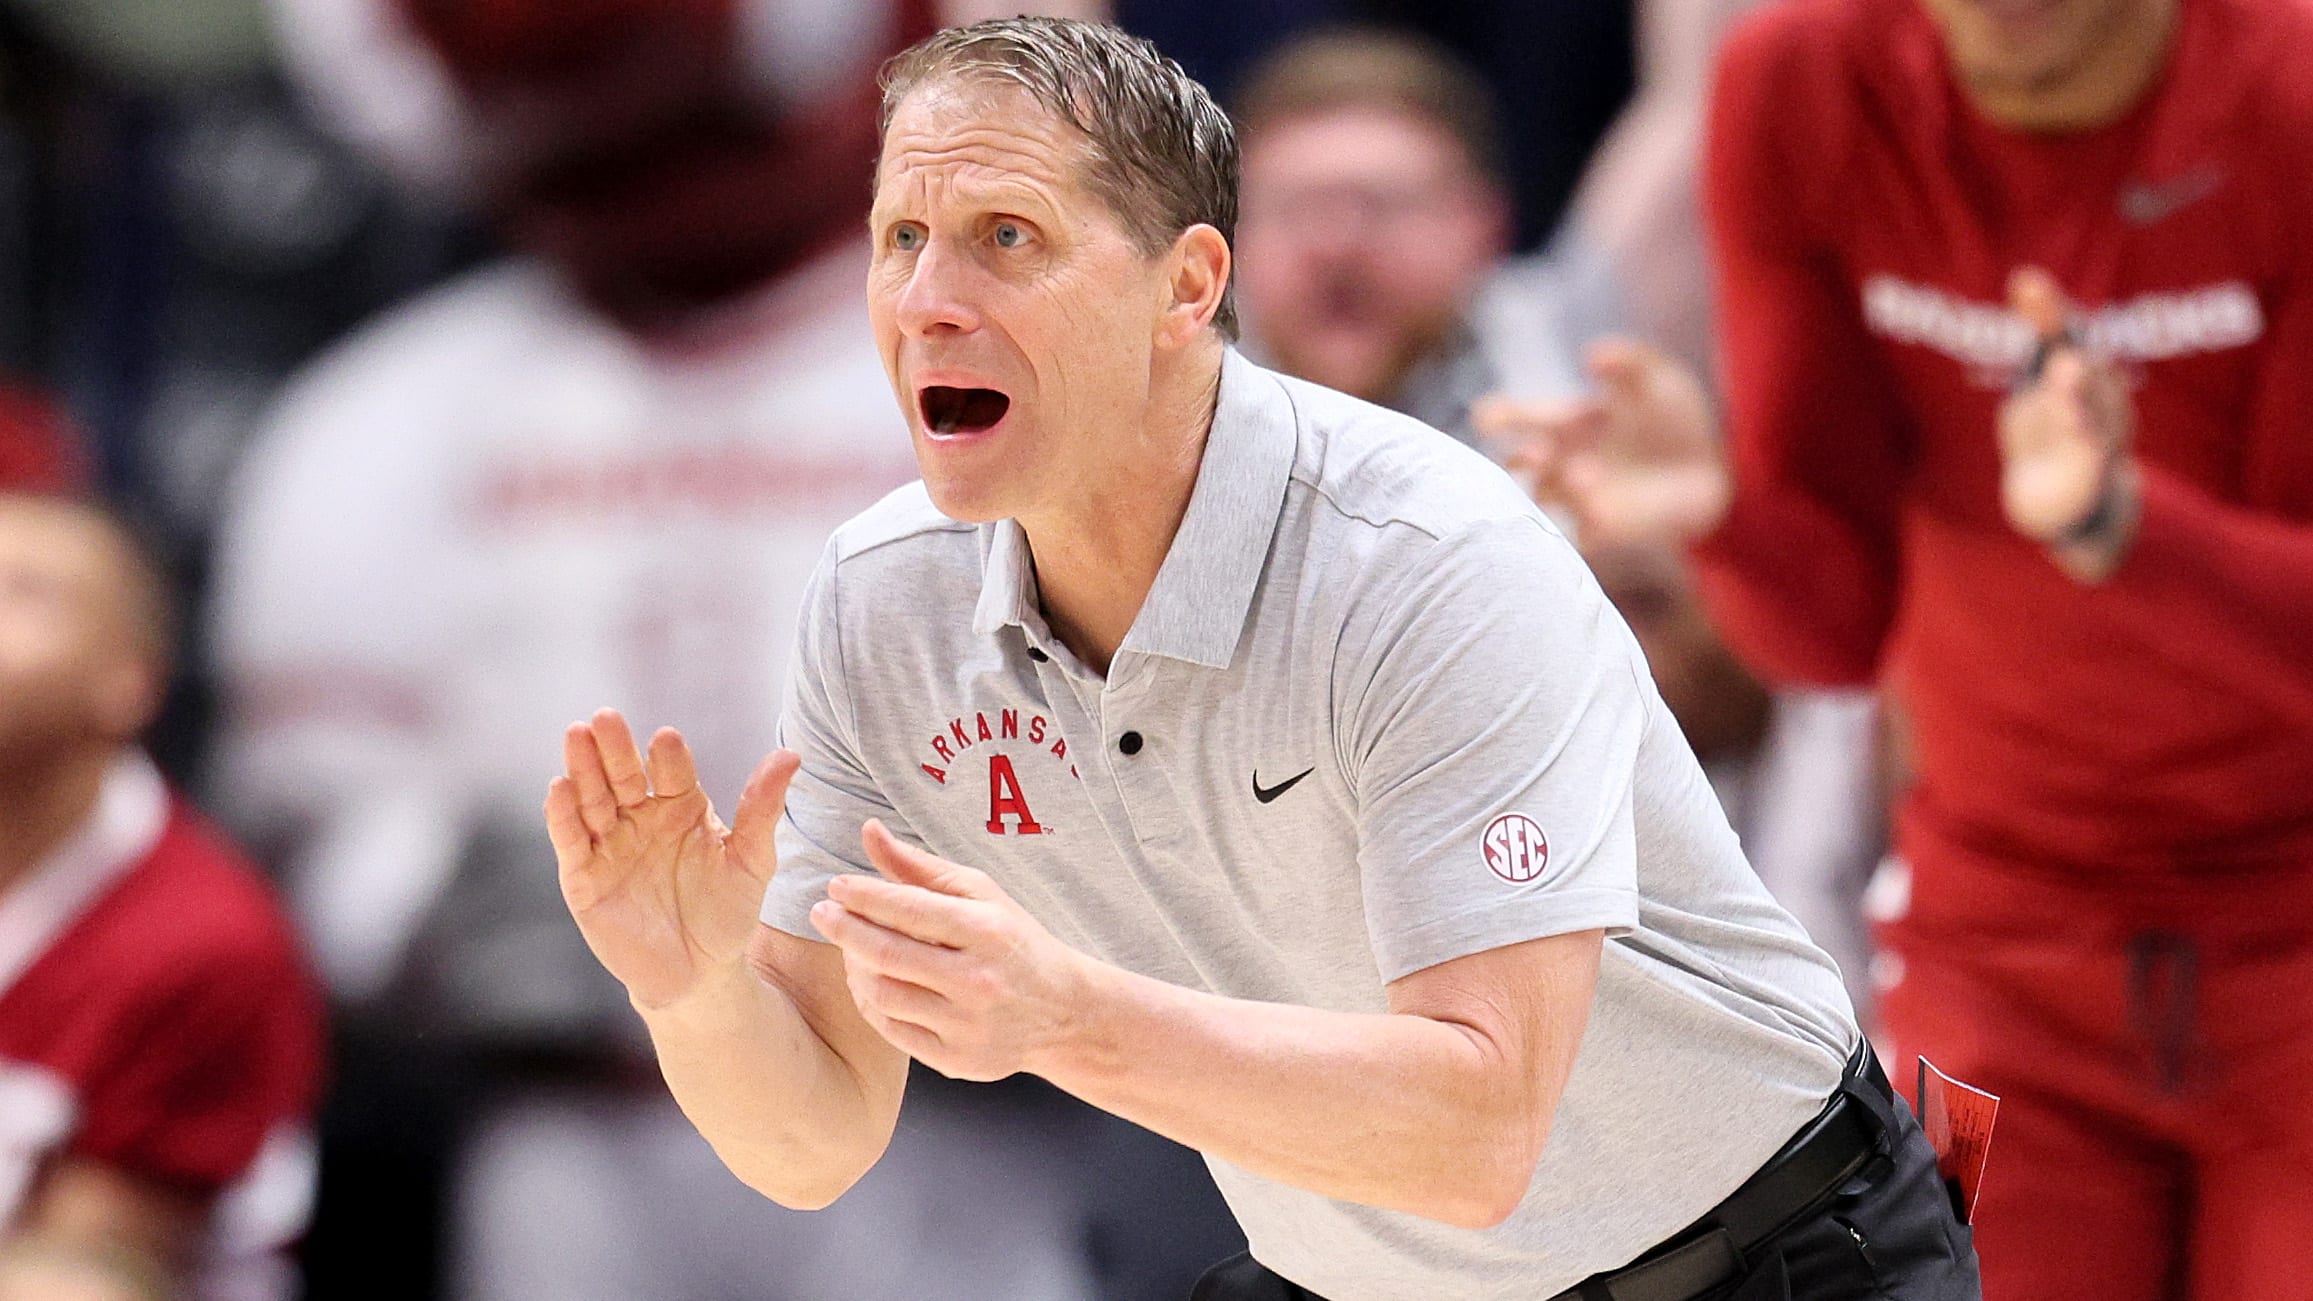 Eric Musselman encourages his players in the SEC Tournament against South Carolina.